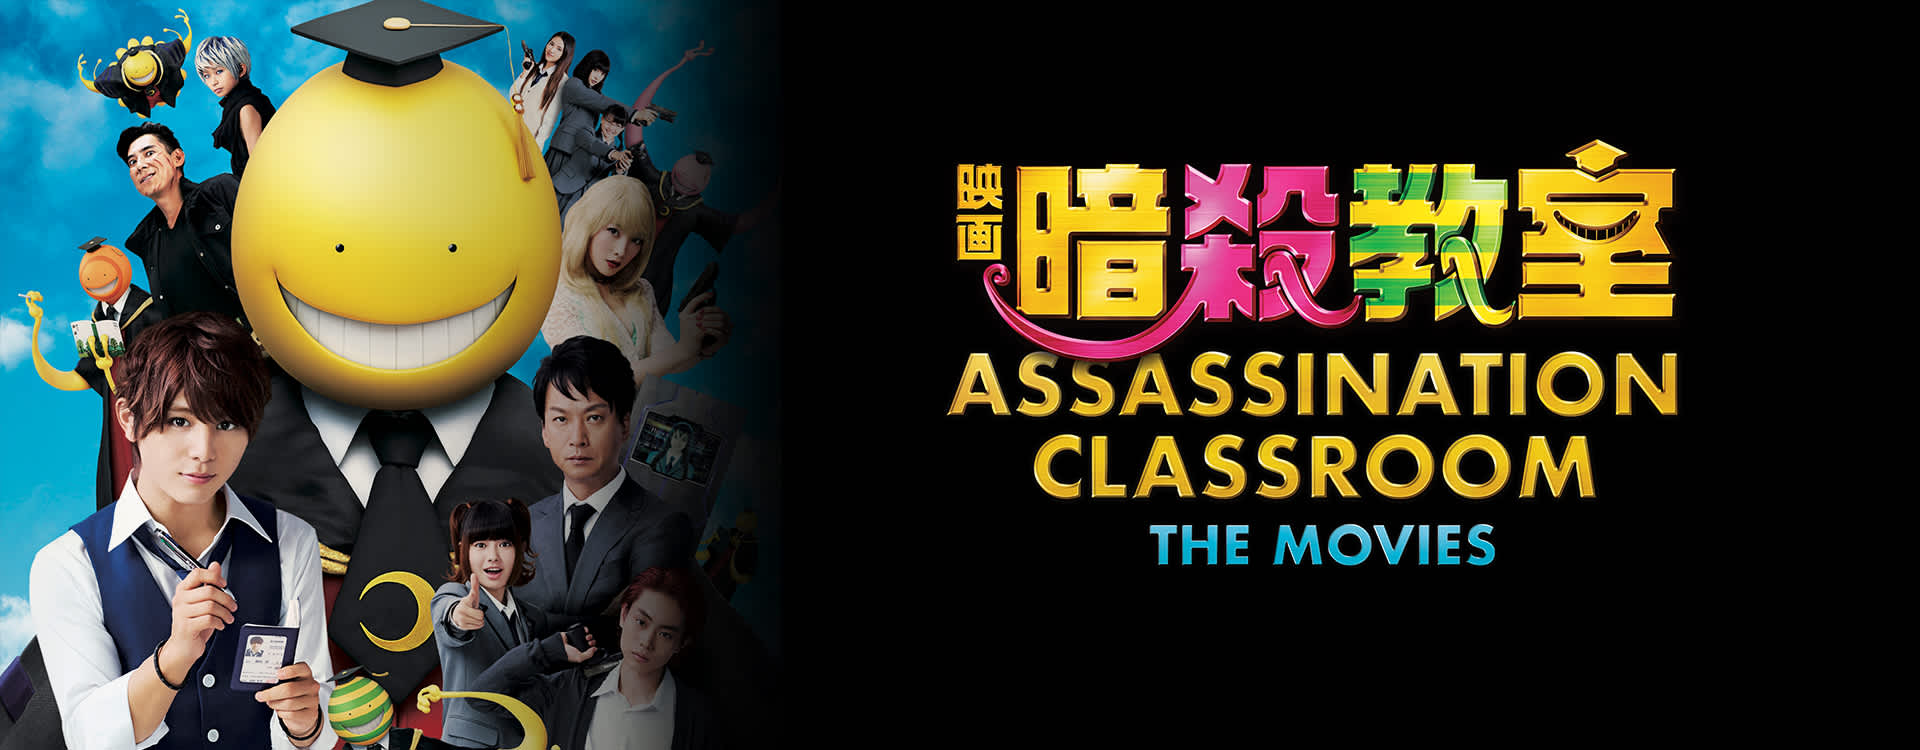 assassination classroom live action watch free online